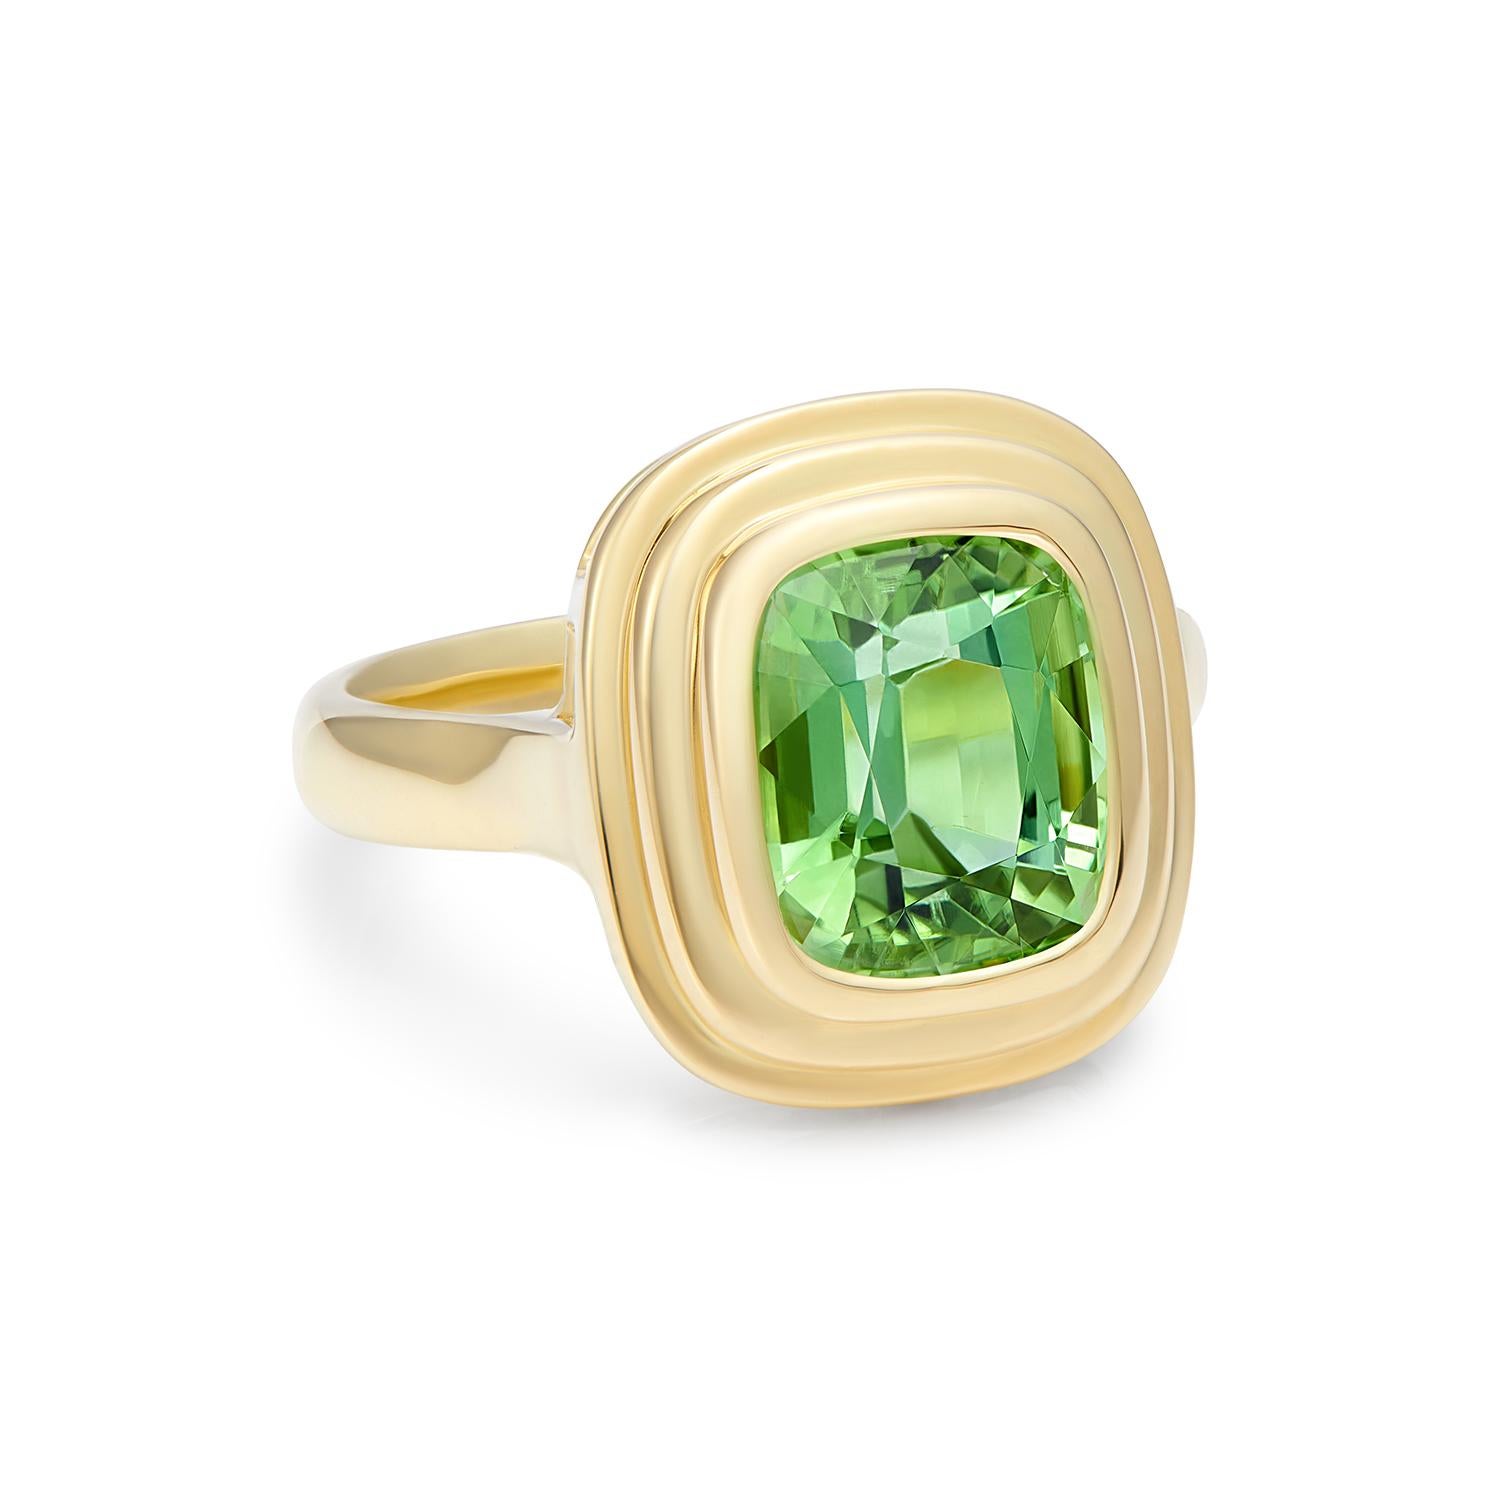 3.51 carat Green Tourmaline ring set in 18 karat yellow gold. This beautiful green Tourmaline is a vivid green colour in a wonderful statement size, forever changing in different lights. Each piece of this collection is unique due to the rarity of